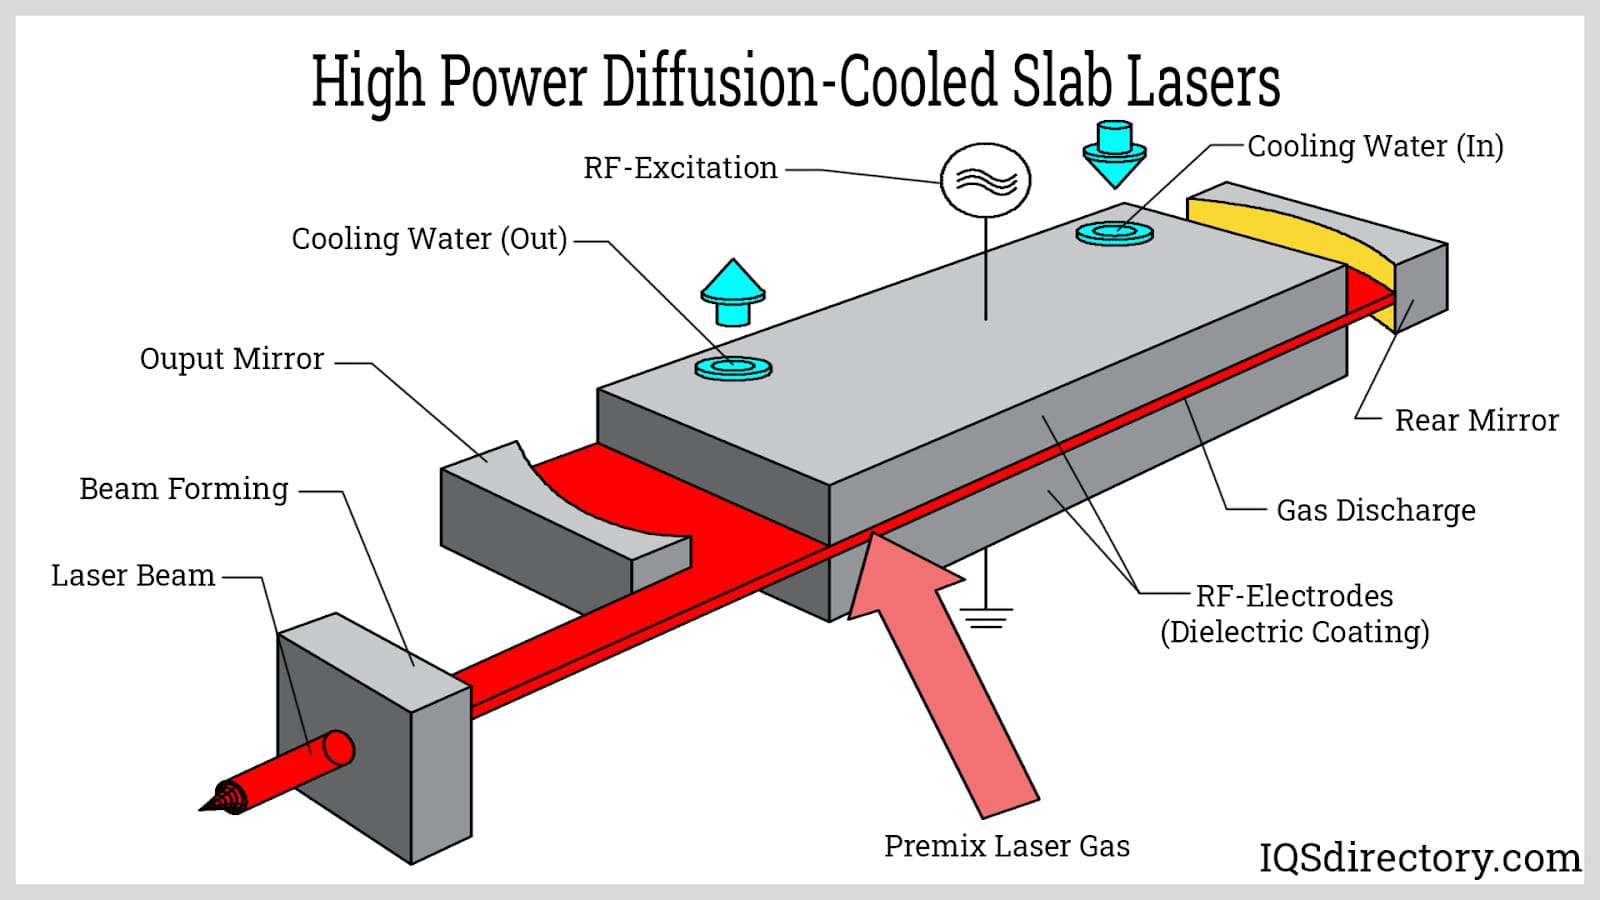 High Power Diffusion-Cooled Slab Lasers